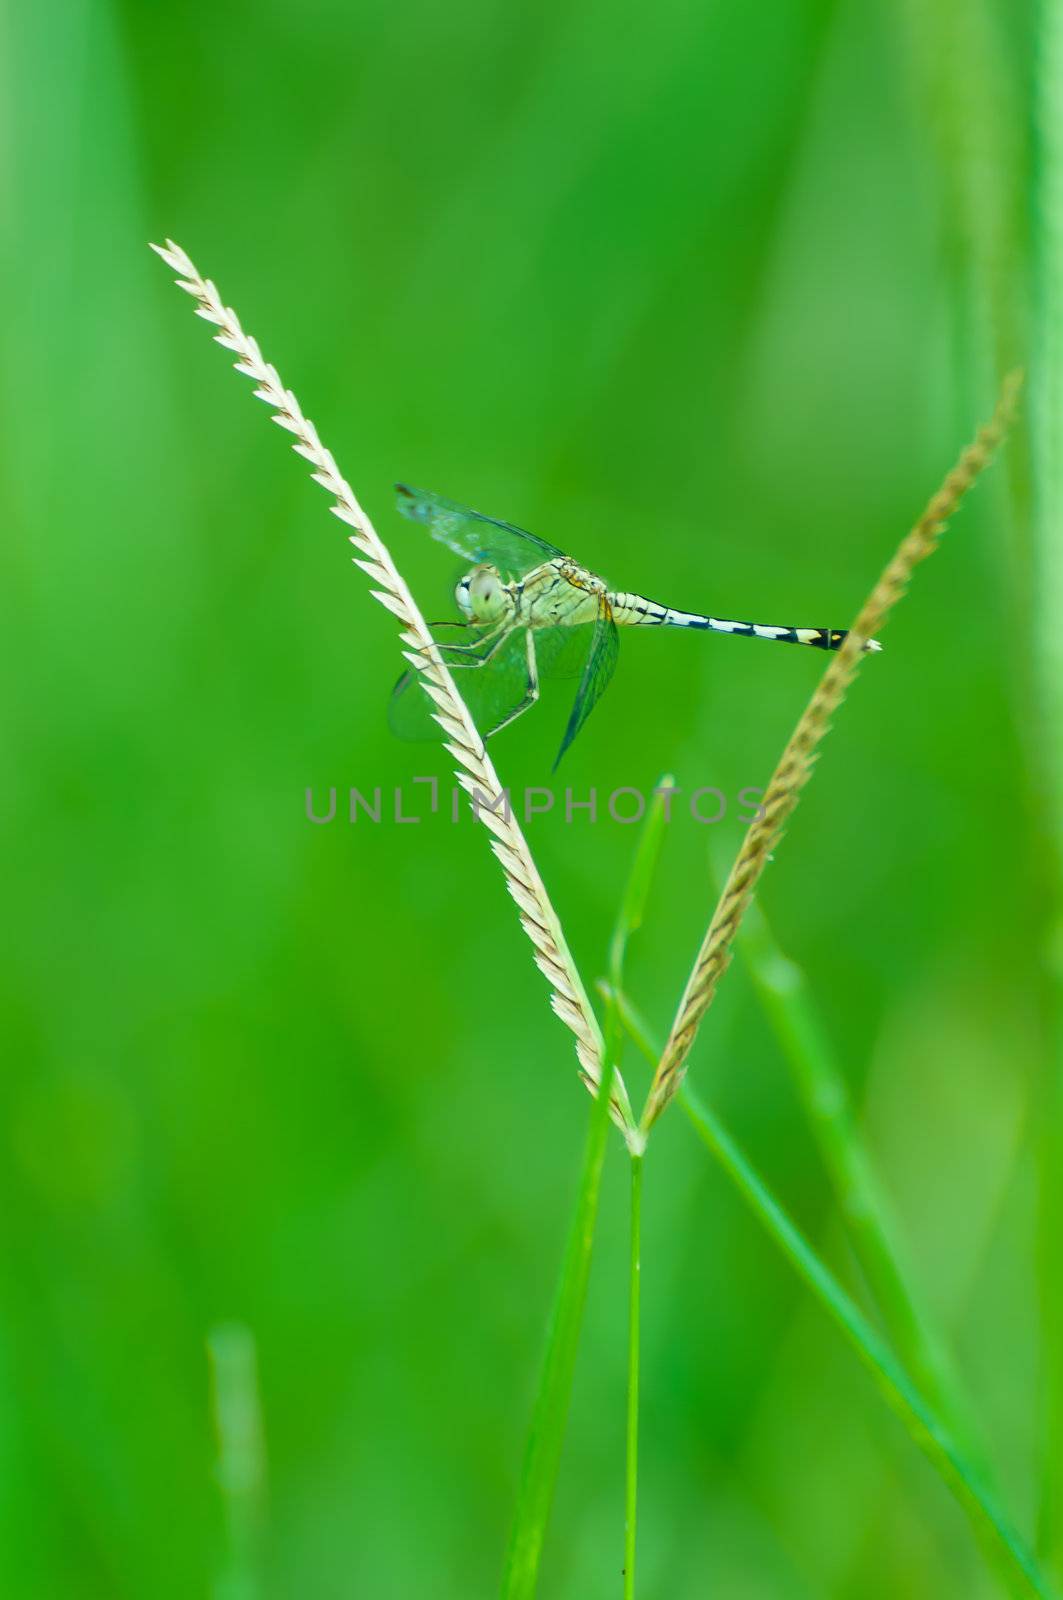 dragonfly at rest green grass by moggara12